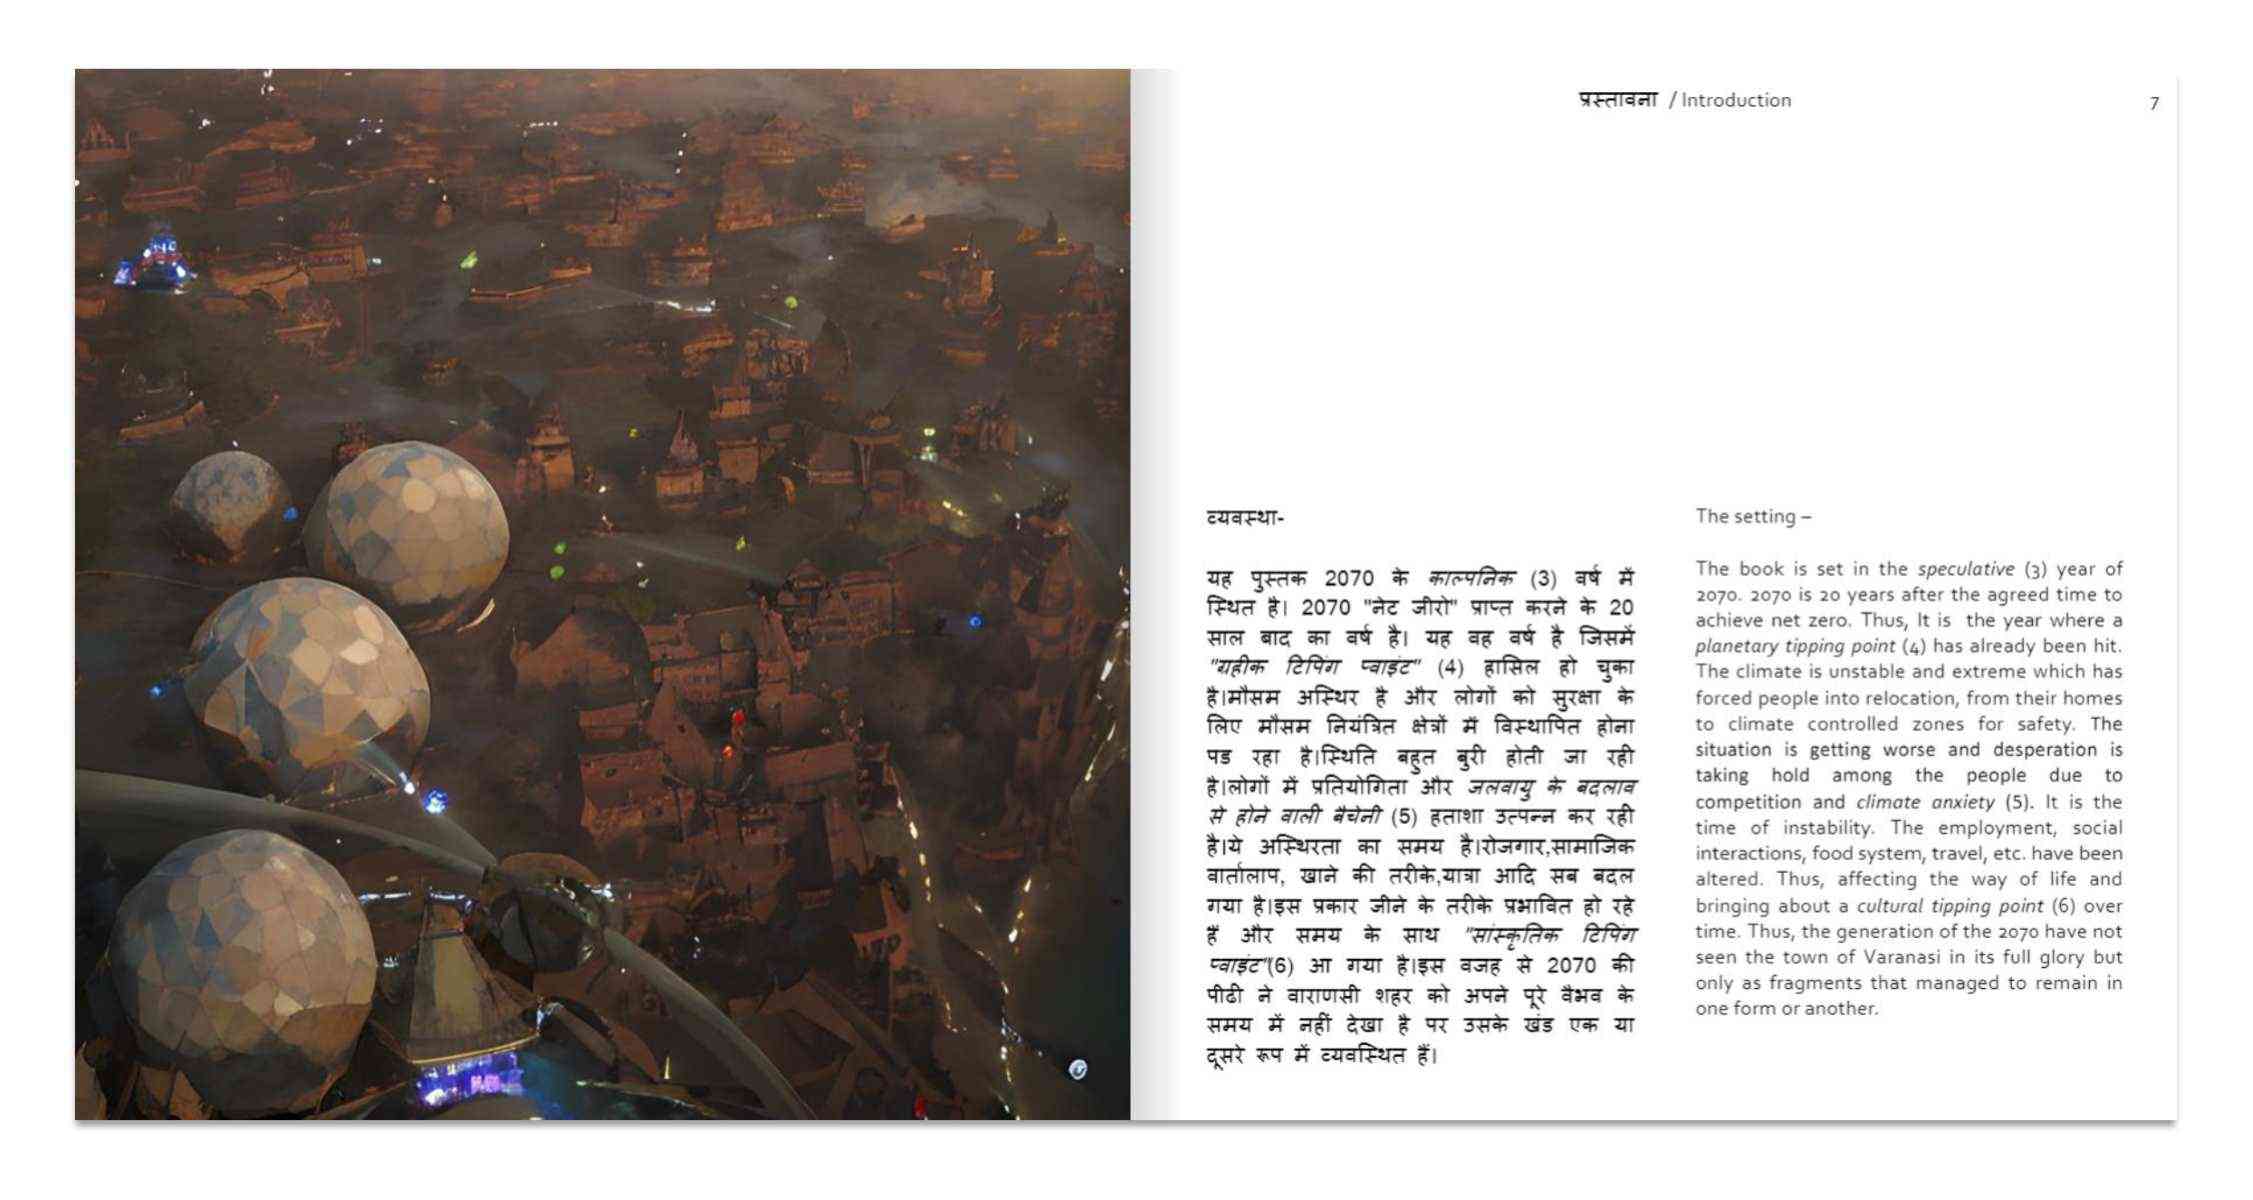 KEEP IT! KASHI - A design fiction presenting life in 2070, that highlights the existing potential of the Indian town of Kashi, when seen from the perspective of planetary and social wellbeing, in contrast to the growth imperative. By Shivangi Singhal